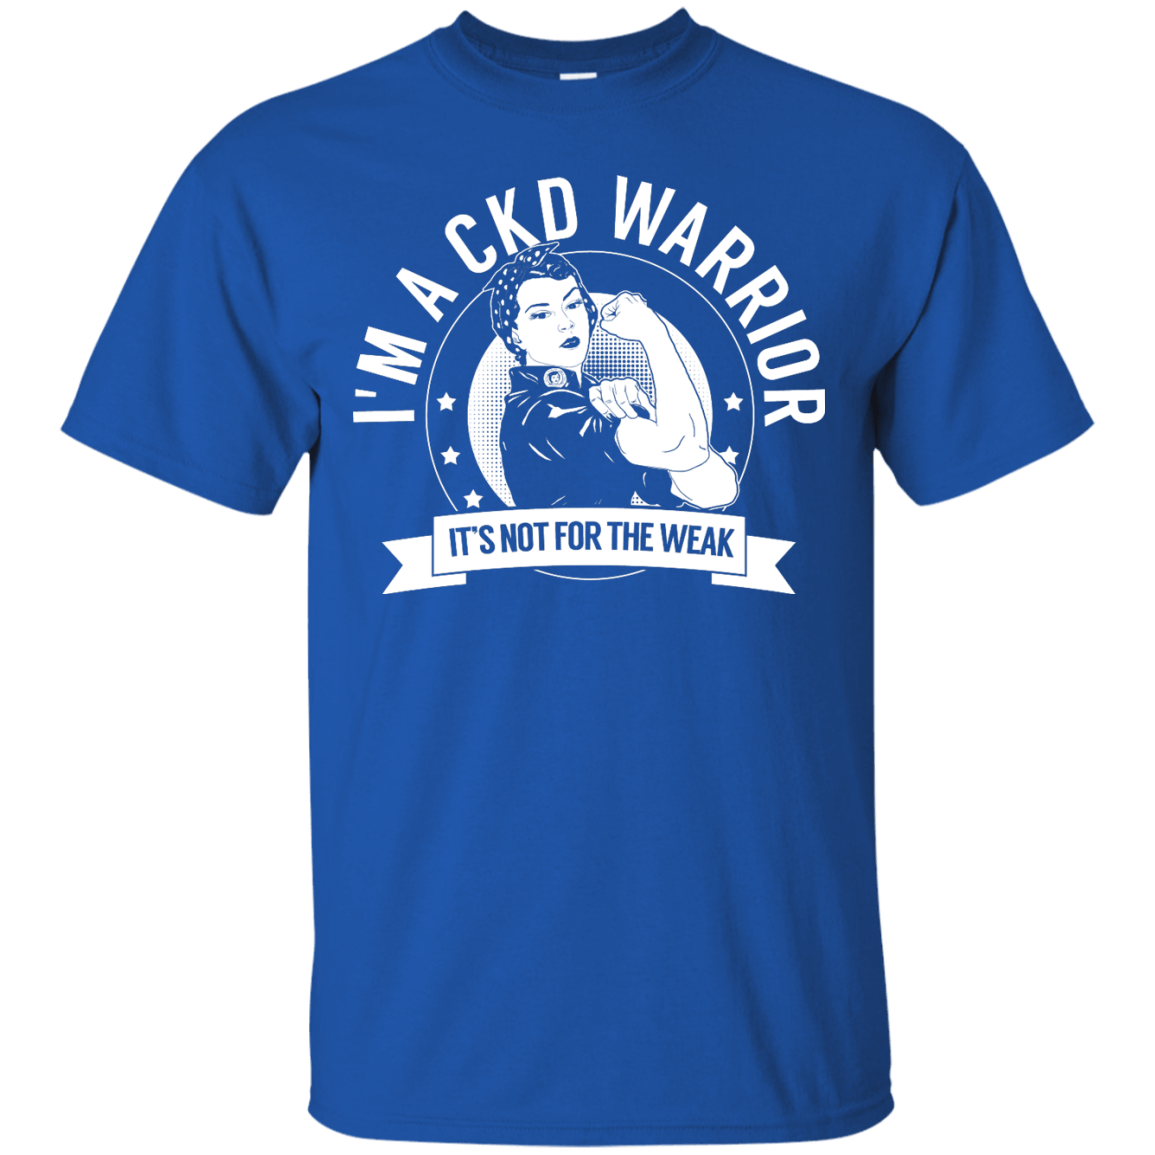 Chronic Kidney Disease - CKD Warrior Not For The Weak Unisex Shirt - The Unchargeables